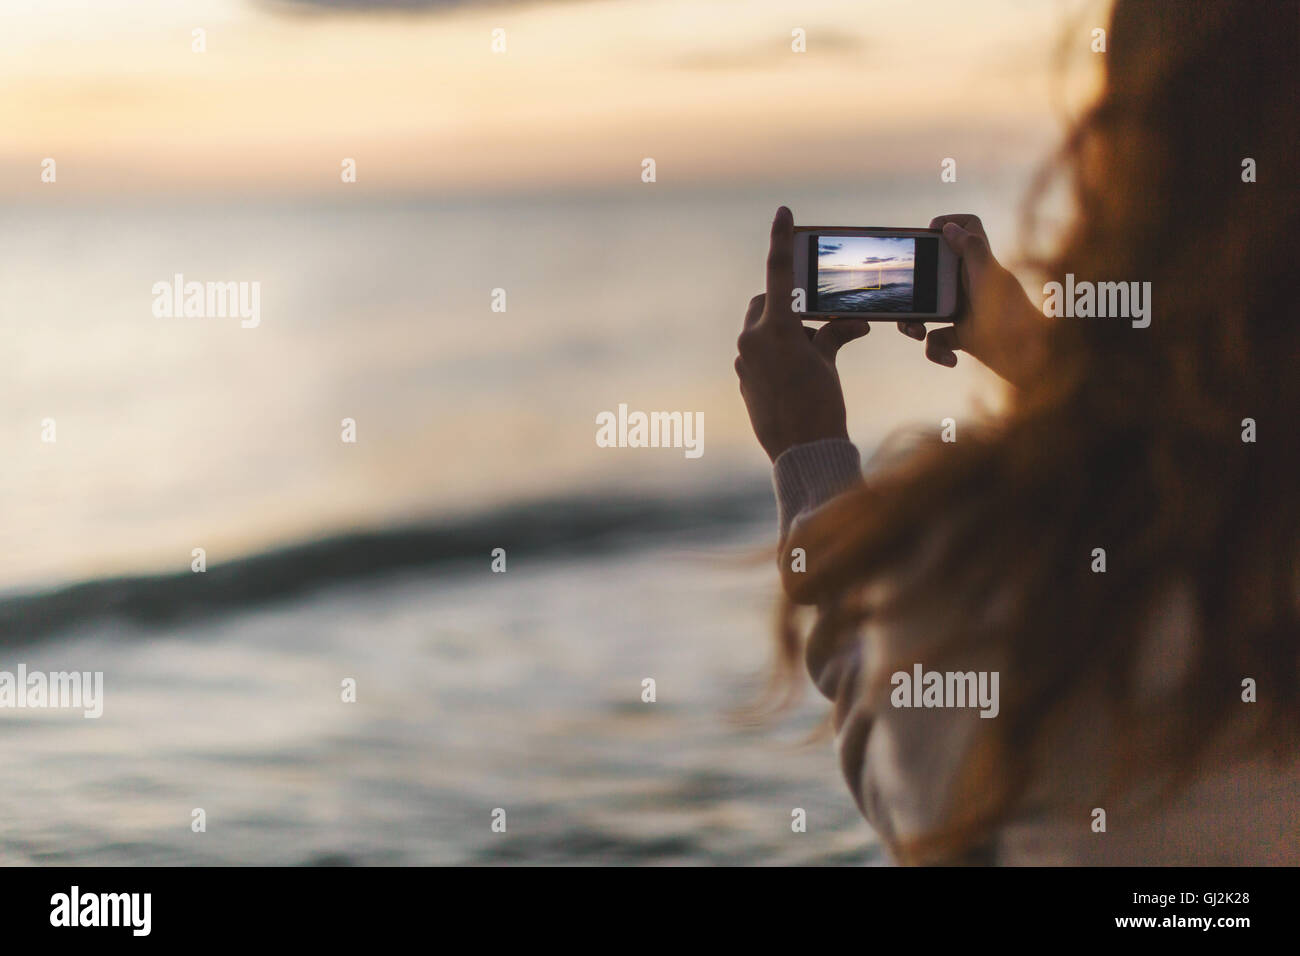 Woman taking photograph with mobile phone on beach Banque D'Images